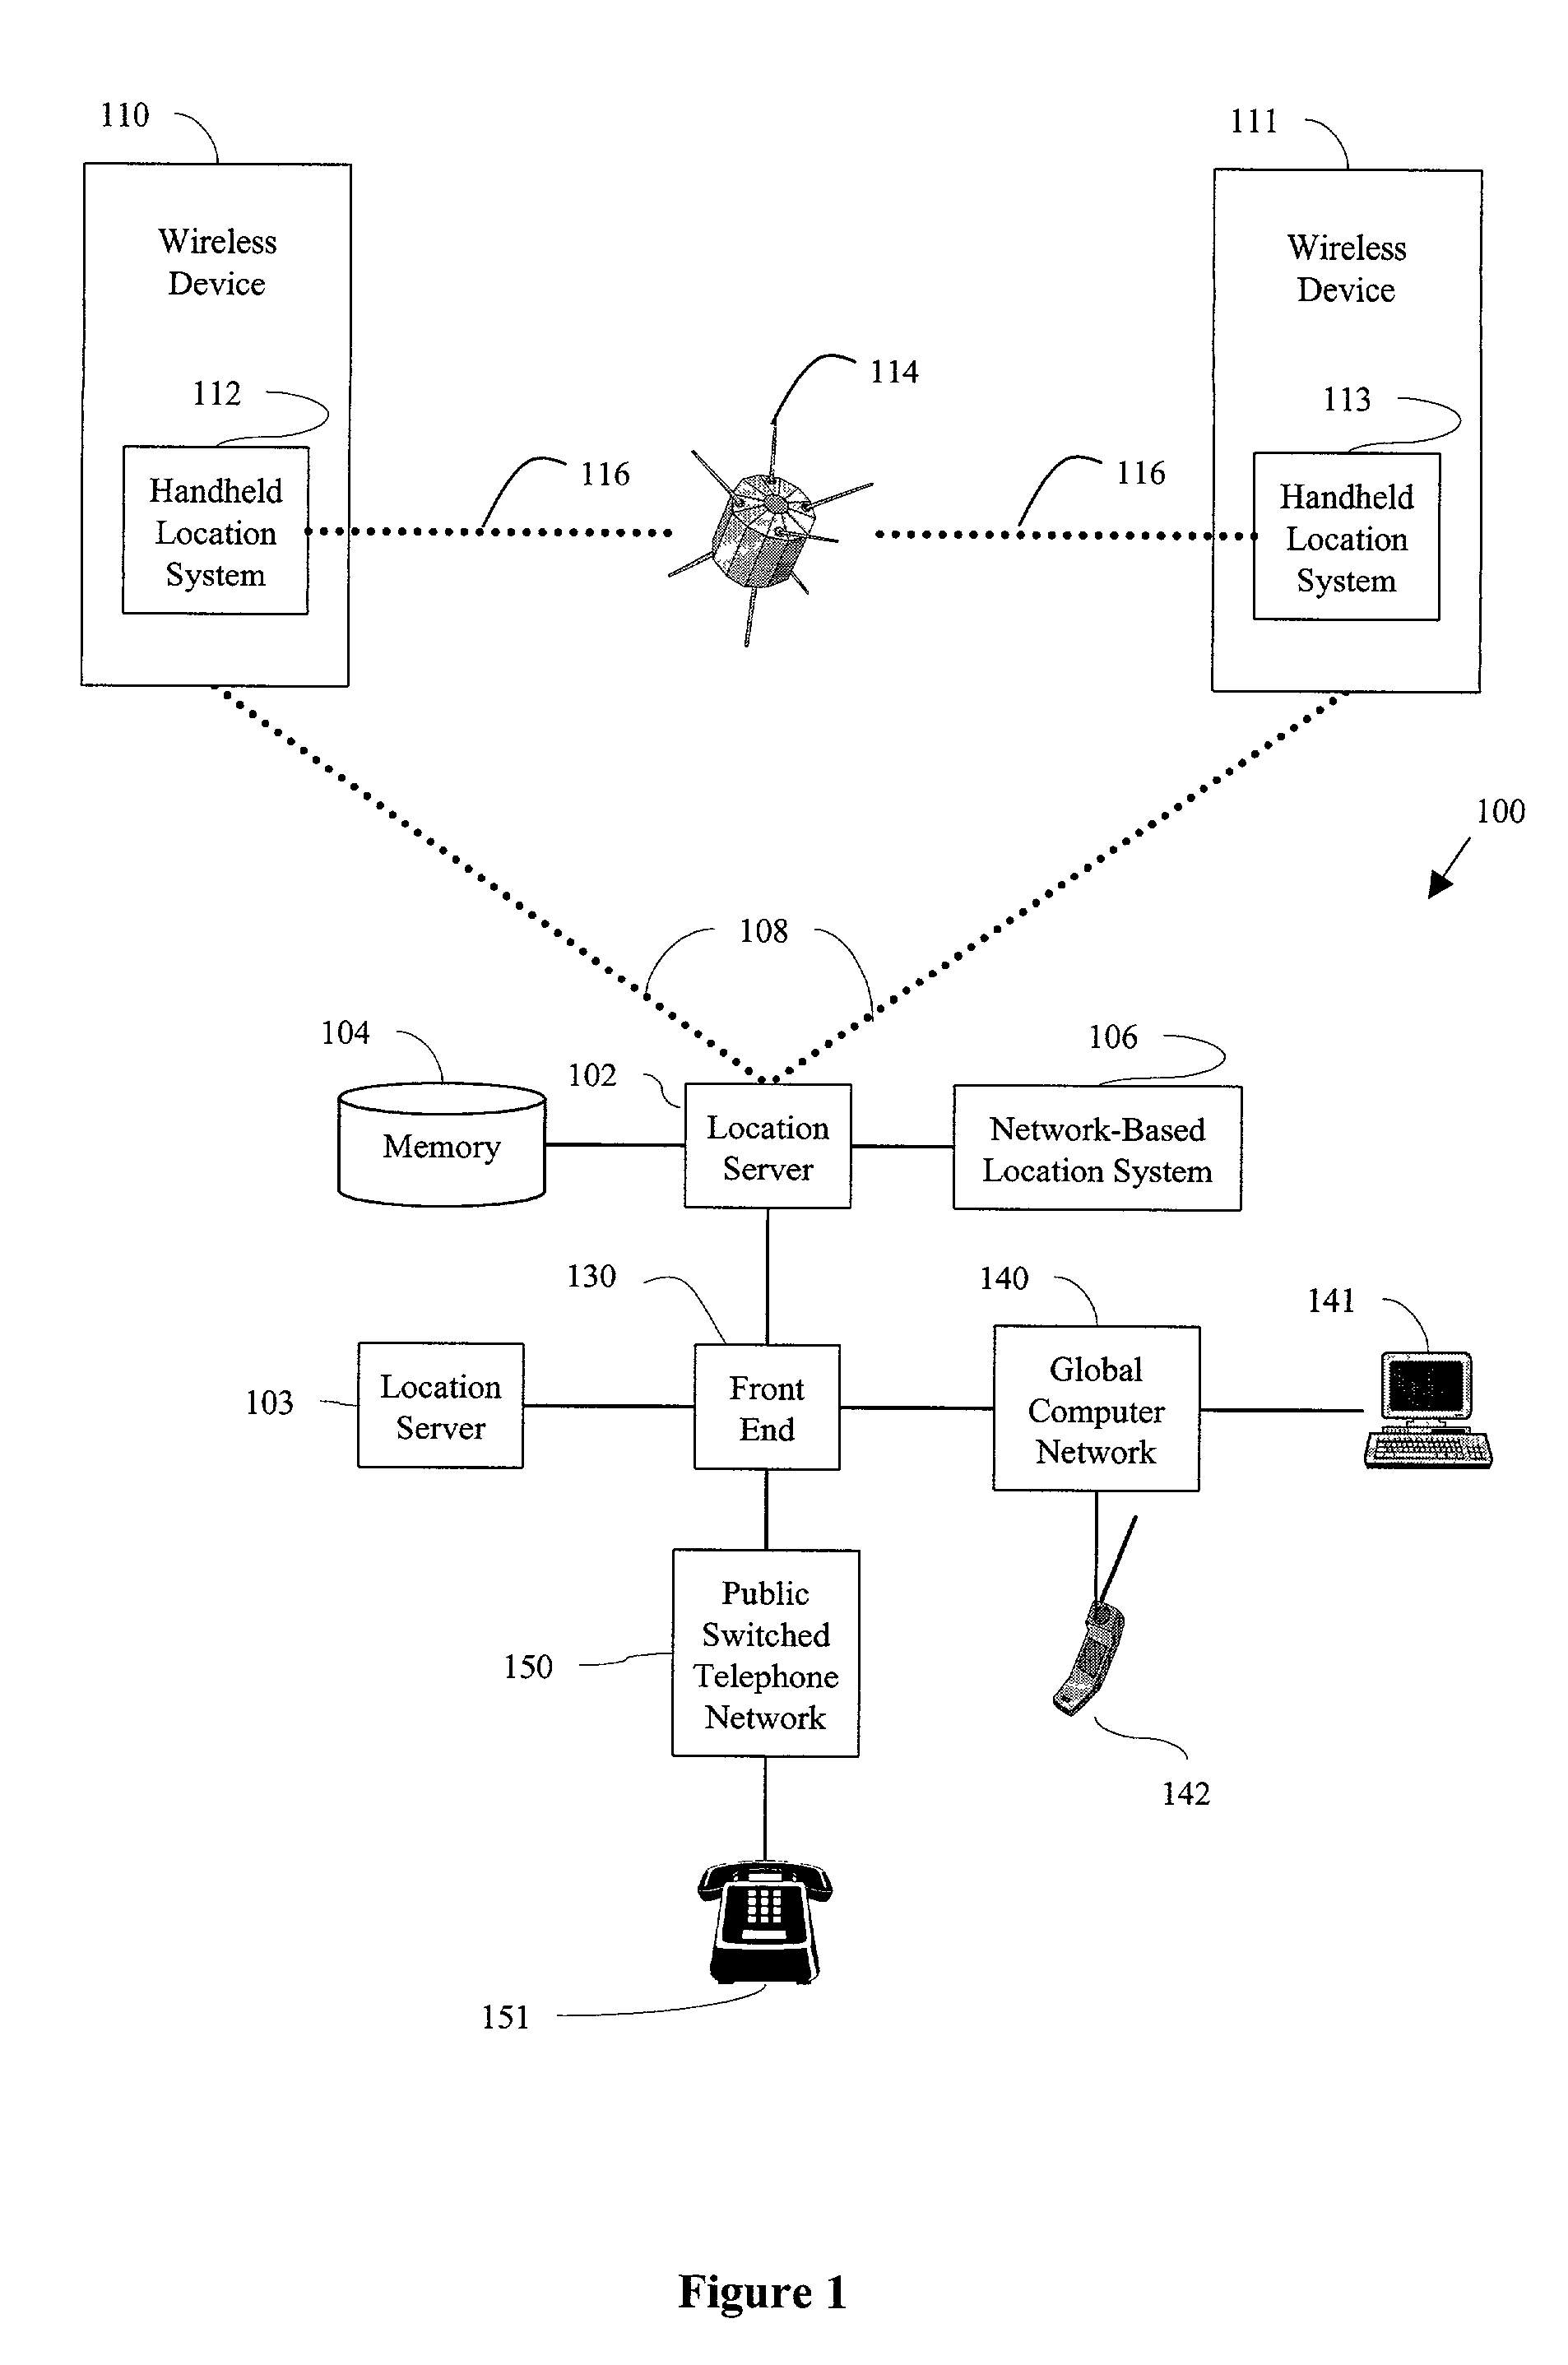 System and method for surveying wireless device users by location